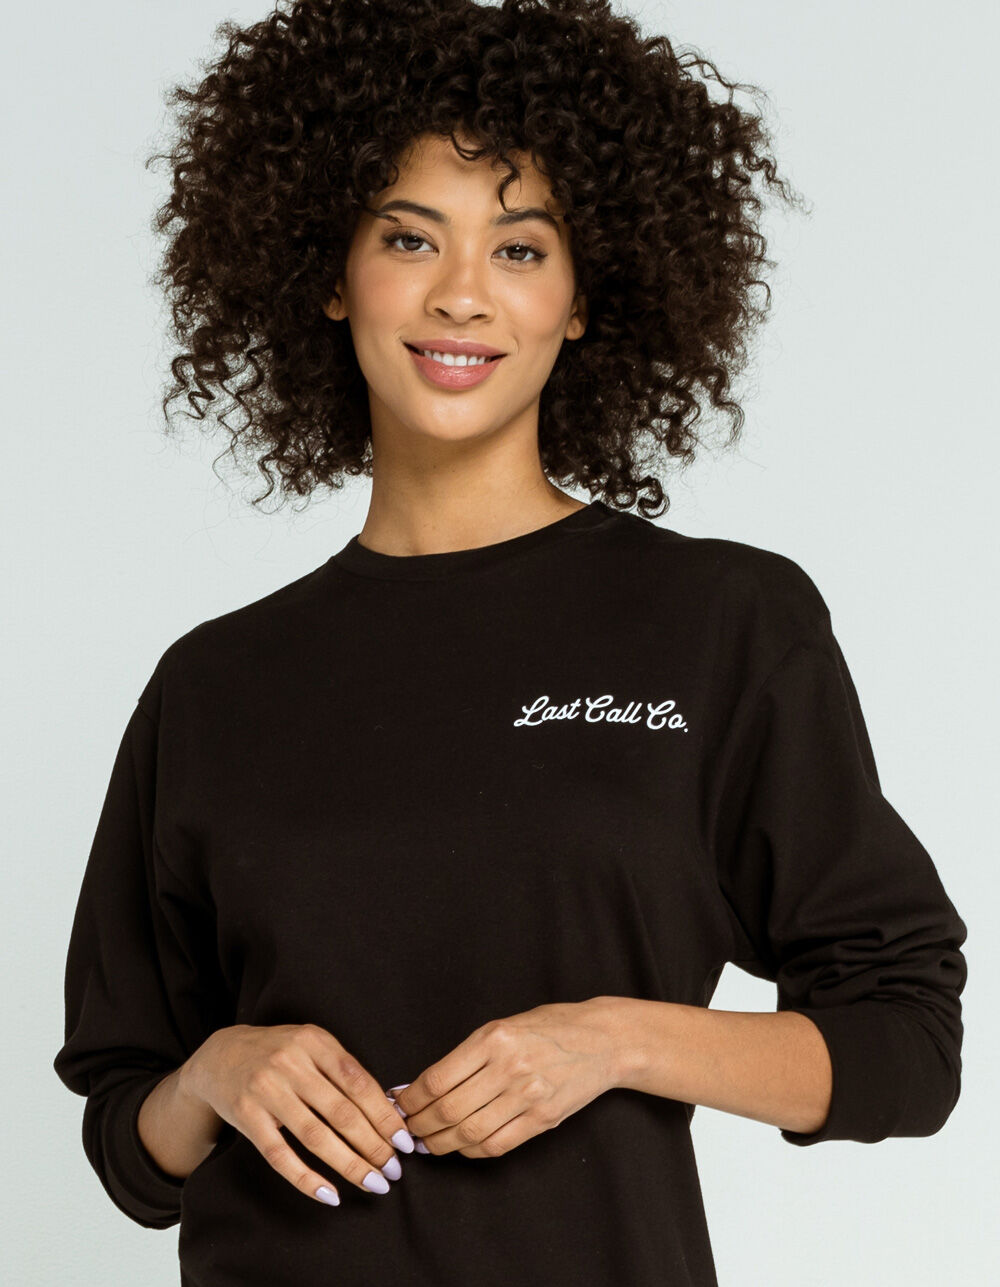 LAST CALL CO. Signs Womens Tee - BLACK | Tillys